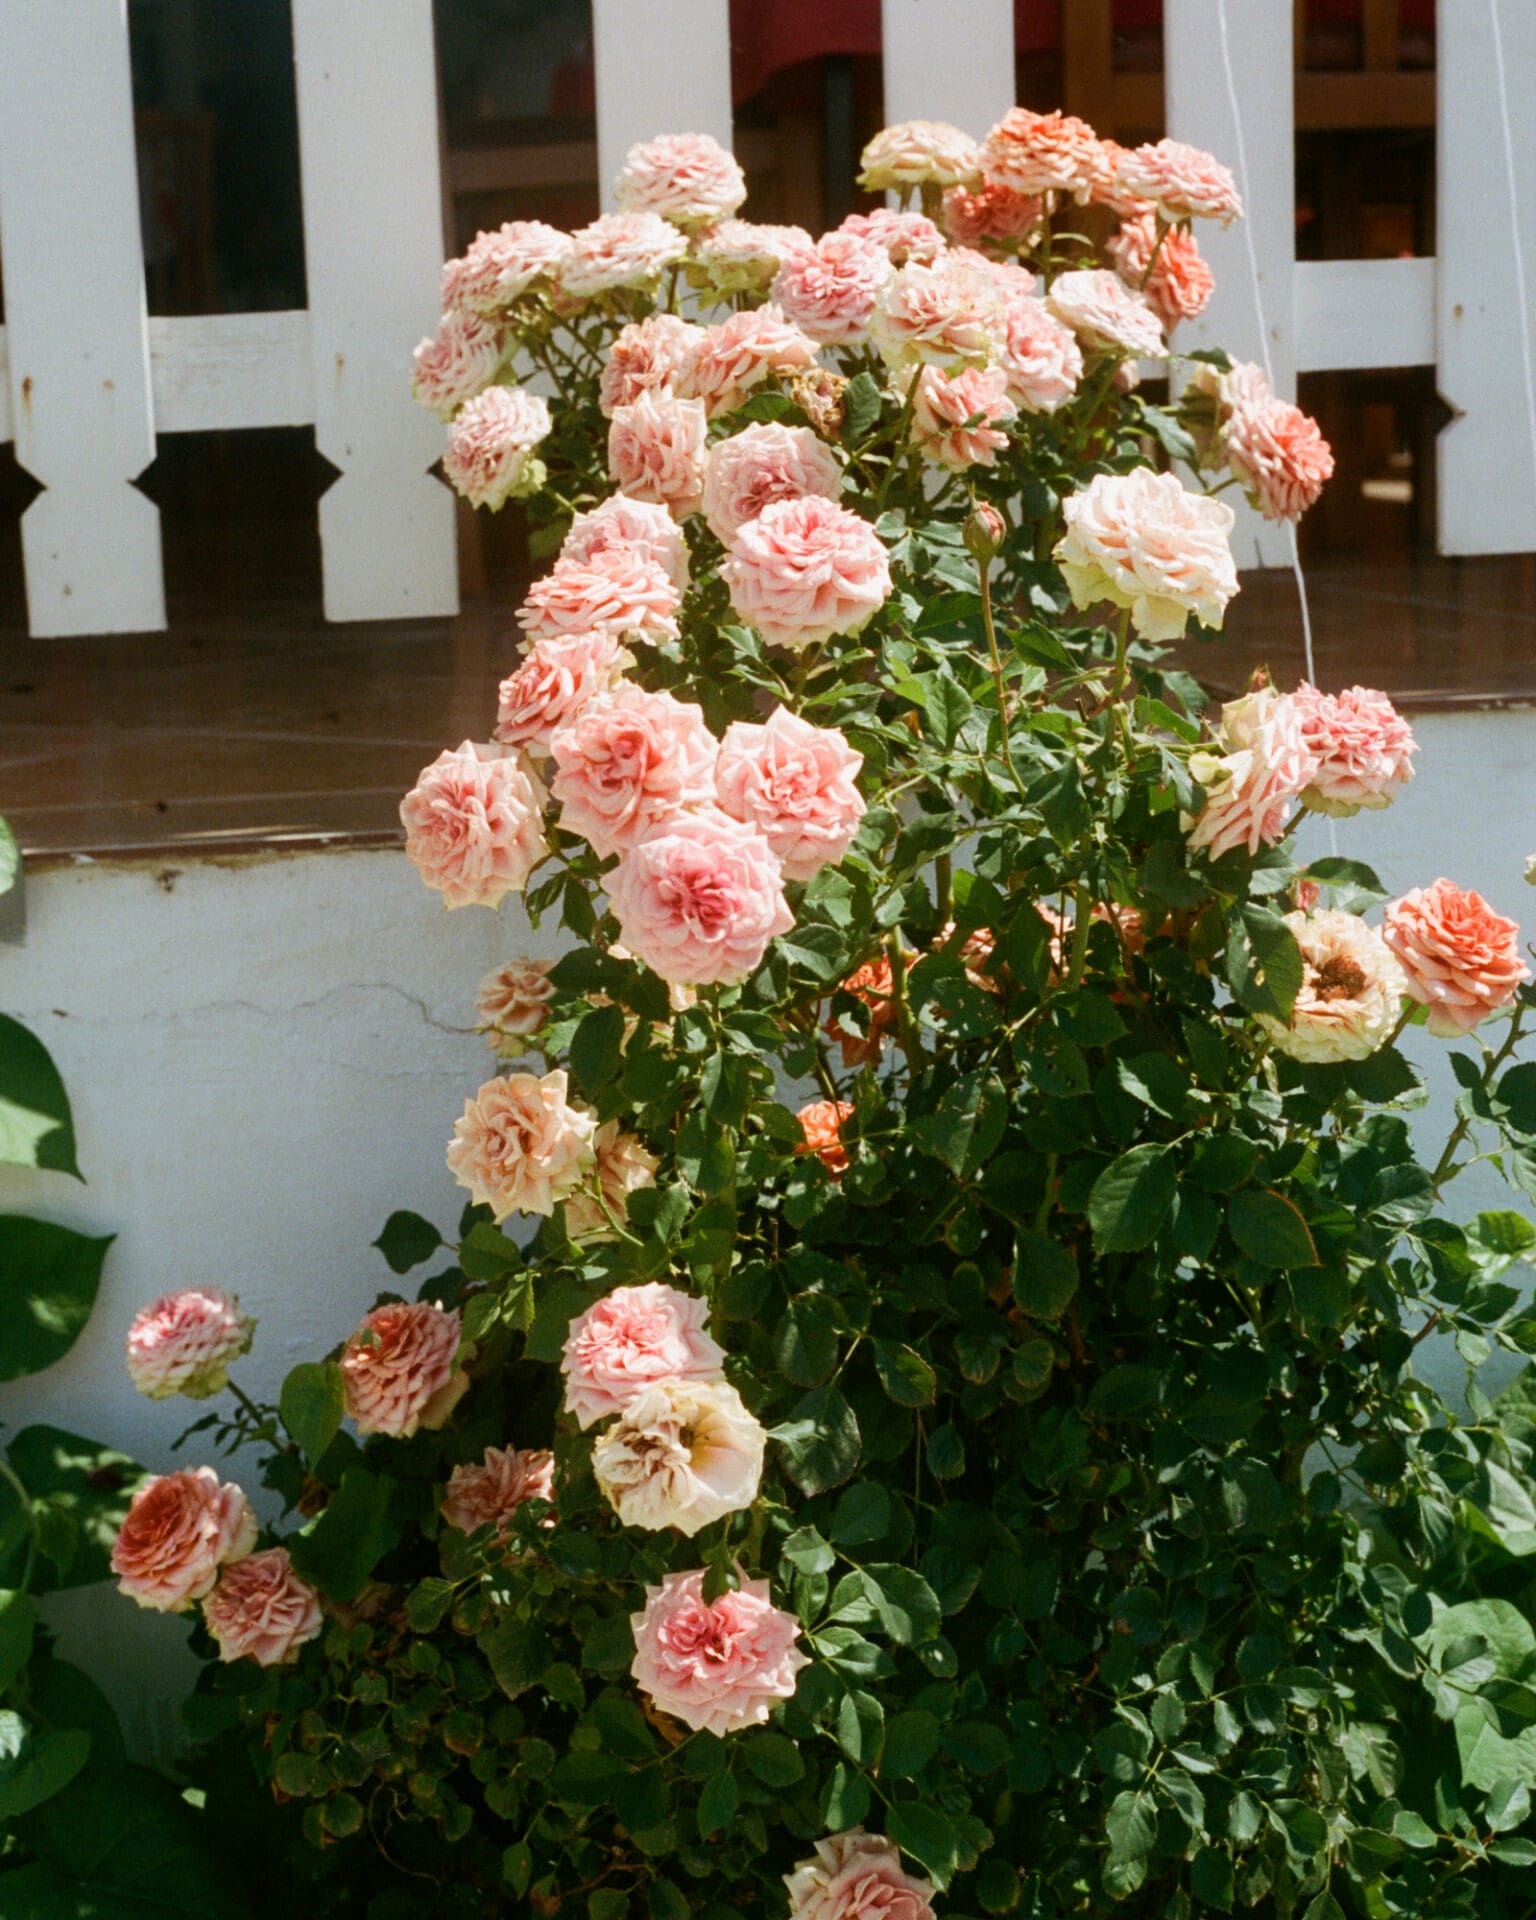 Hazel Gaskin photographs Albania | A pale-pink rose bush in full bloom against a white fence